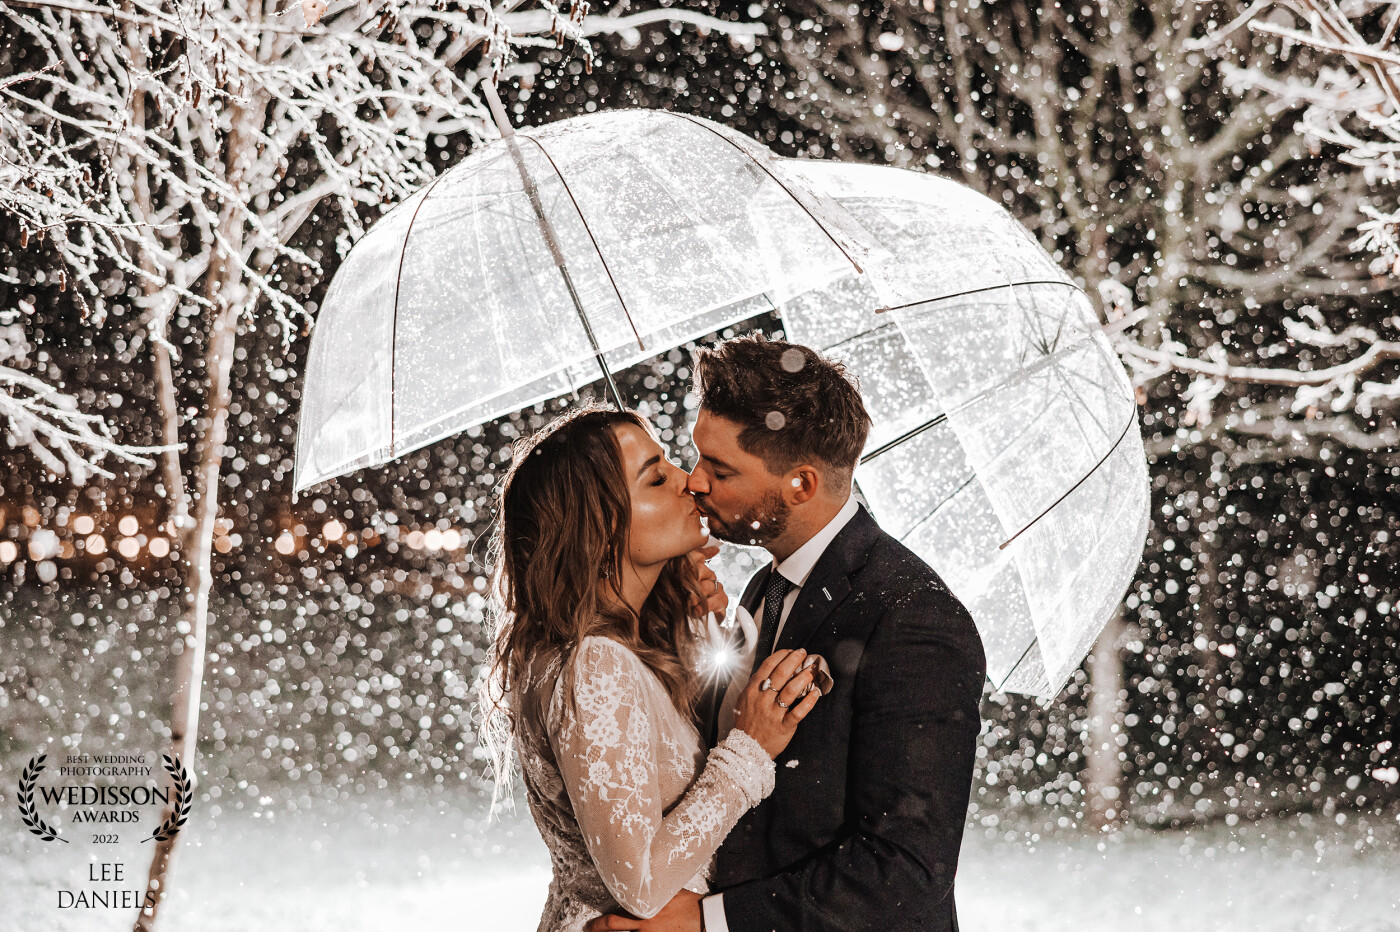 Snow on your wedding day in the UK is rare! Laura & Sam got lucky so we made the most of these magical conditions whilst they lasted <br />
<br />
Venue - Stone Barn, Cripps & Co